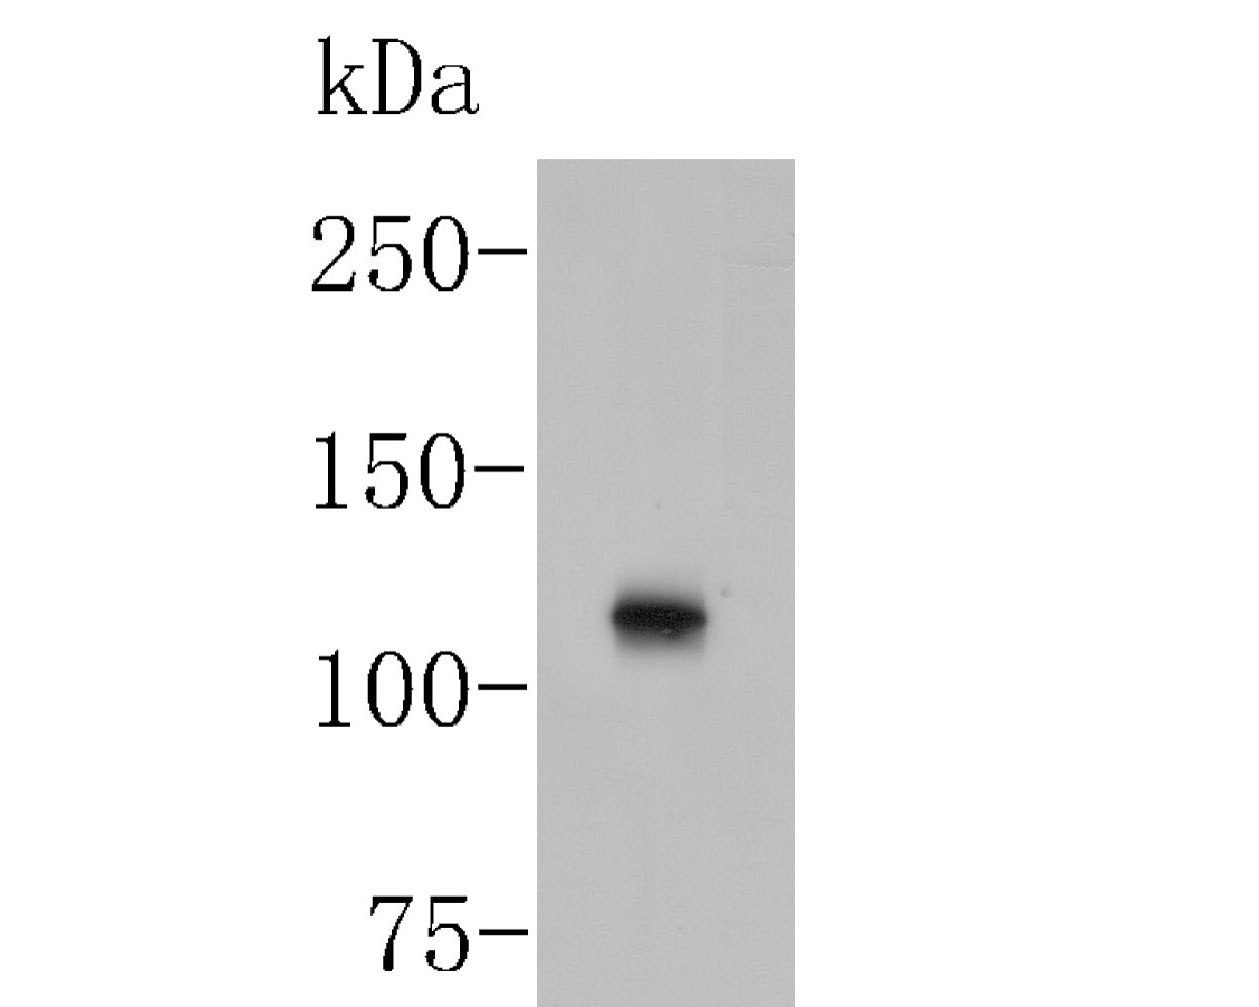 Western blot analysis of Meckelin on MCF-7 cell lysate. Proteins were transferred to a PVDF membrane and blocked with 5% BSA in PBS for 1 hour at room temperature. The primary antibody (0903-7, 1/500) was used in 5% BSA at room temperature for 2 hours. Goat Anti-Rabbit IgG - HRP Secondary Antibody (HA1001) at 1:5,000 dilution was used for 1 hour at room temperature.